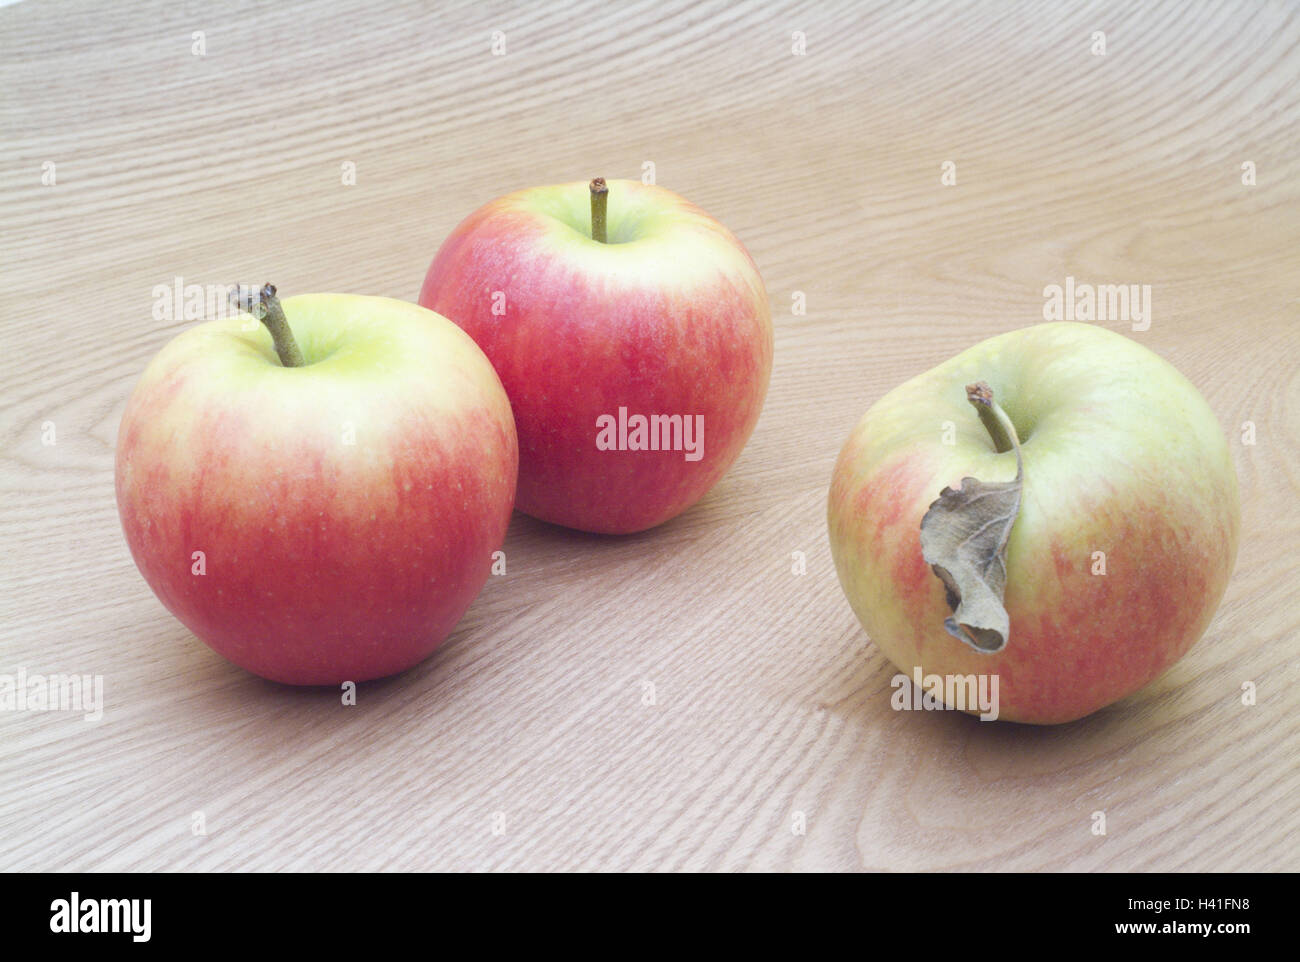 wooden table, apples, Braeburn, three, completely, table, wooden board, wooden surface, fruits, fruit, pomes, Malus, apple sort, ripe, eat, nutrition healthy, rich in vitamins, Still life, product photography Stock Photo